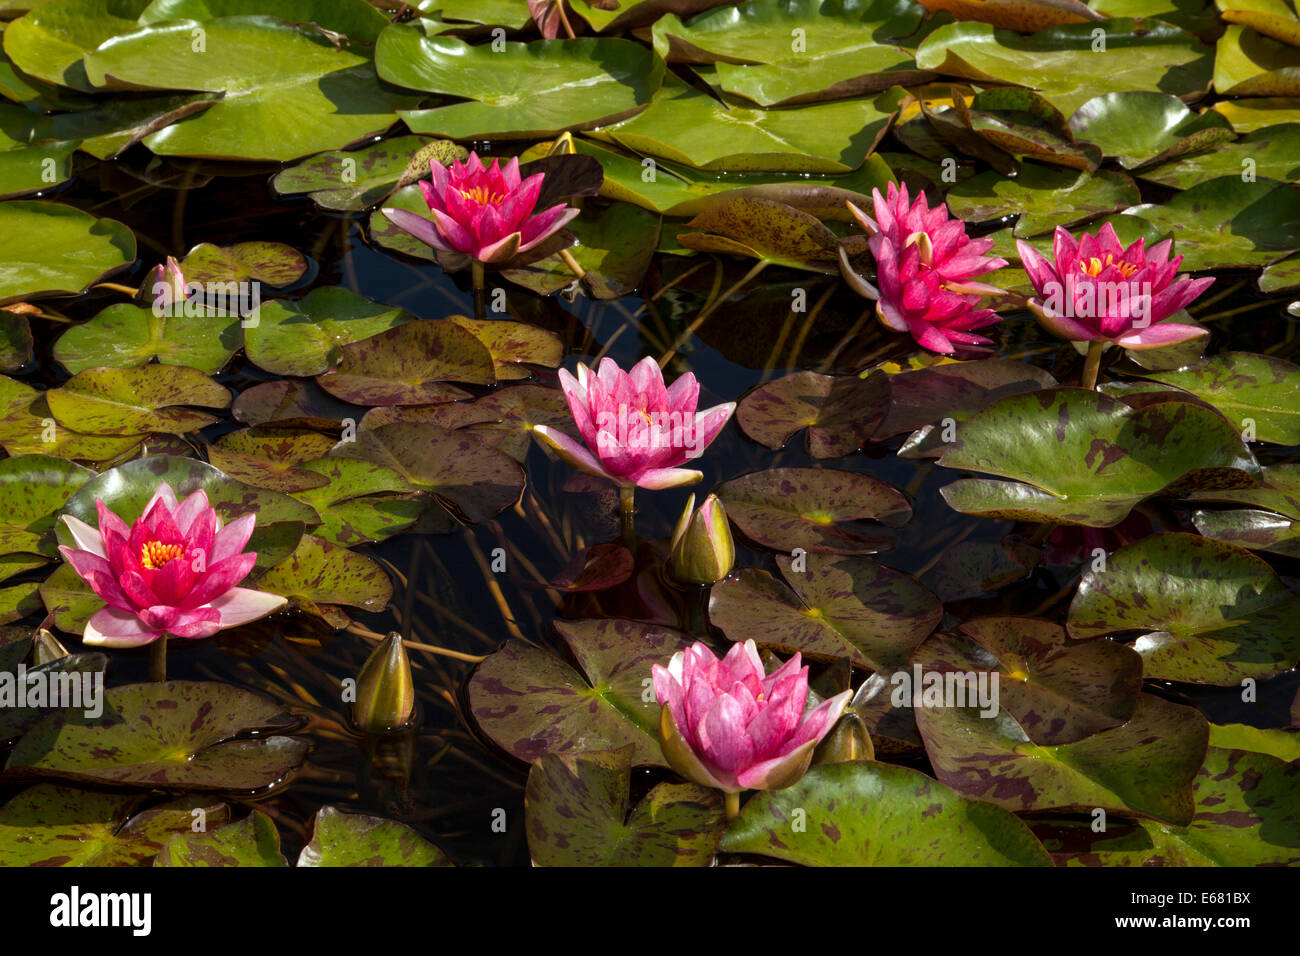 Pink water lilies in the lily pond inside the mission ruin, San Juan Capistrano, California, USA Stock Photo